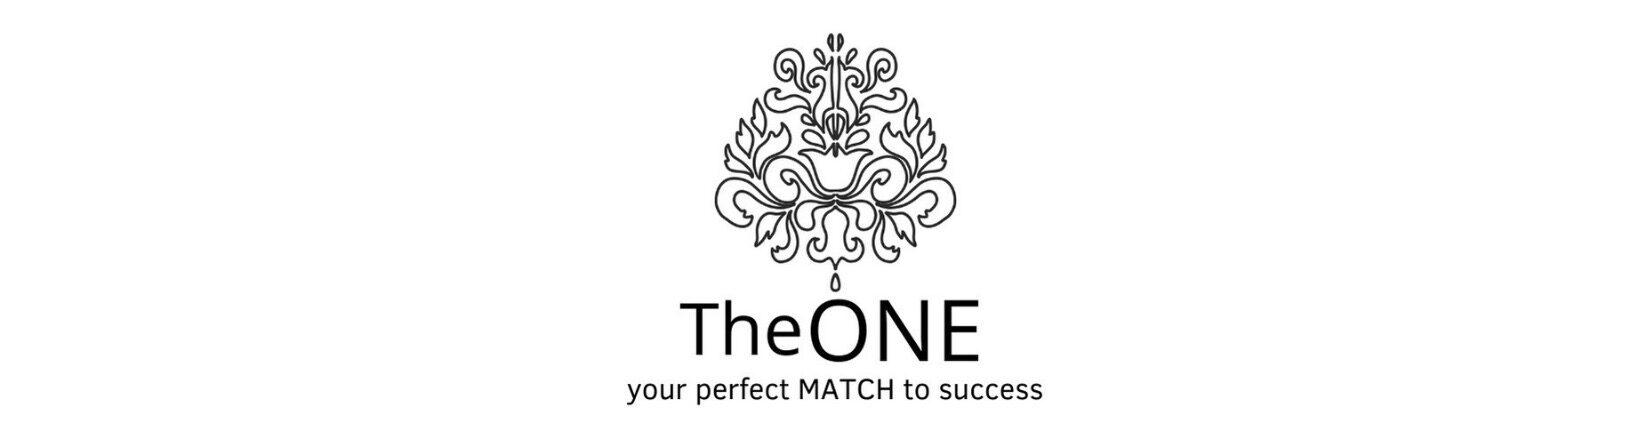 TheONE personal care